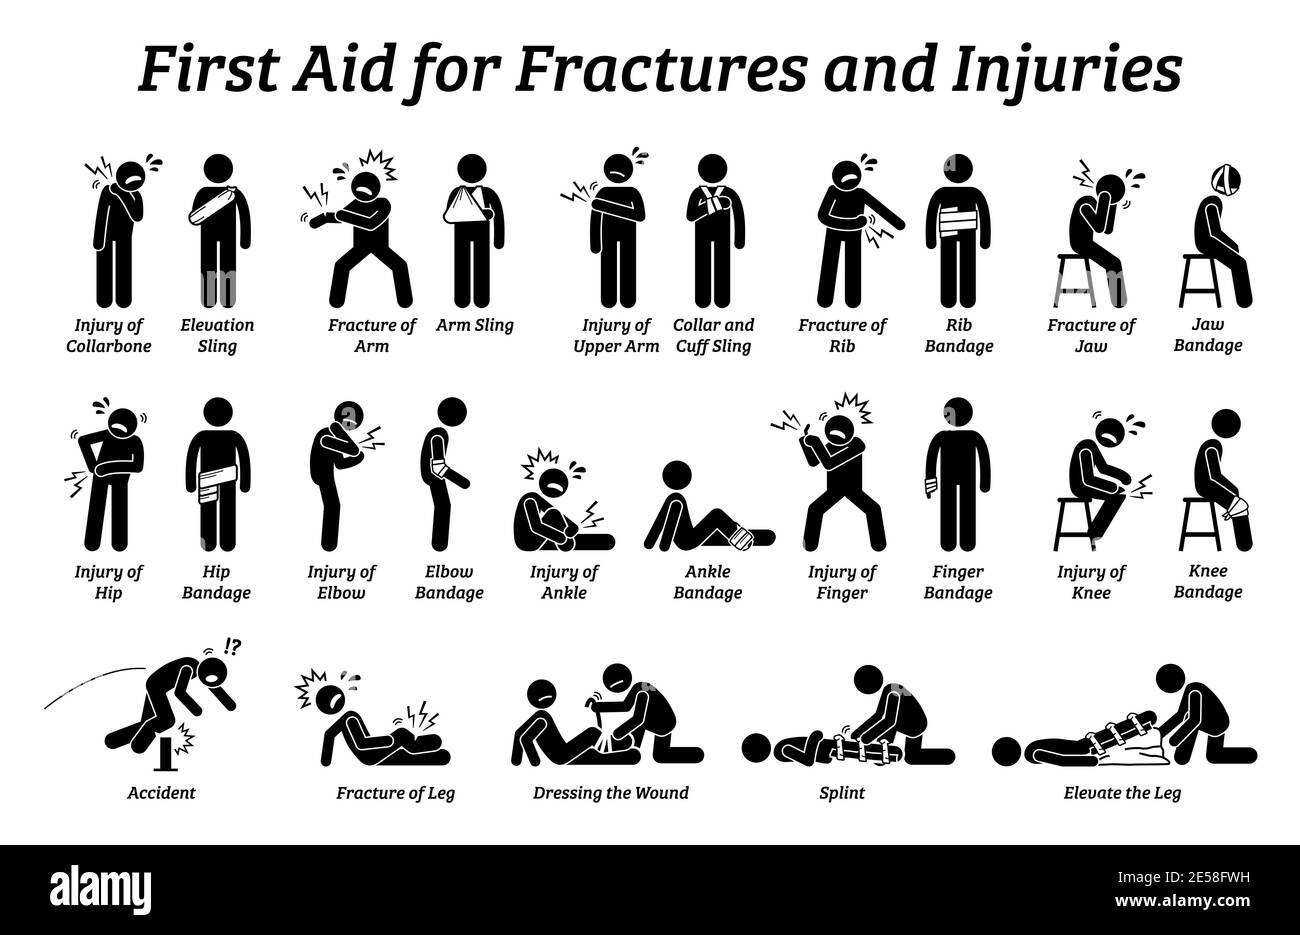 First aid for fractures and injuries on different body parts stick figure icons. Vector illustrations of sling, bandage, and elevation techniques trea Stock Vector